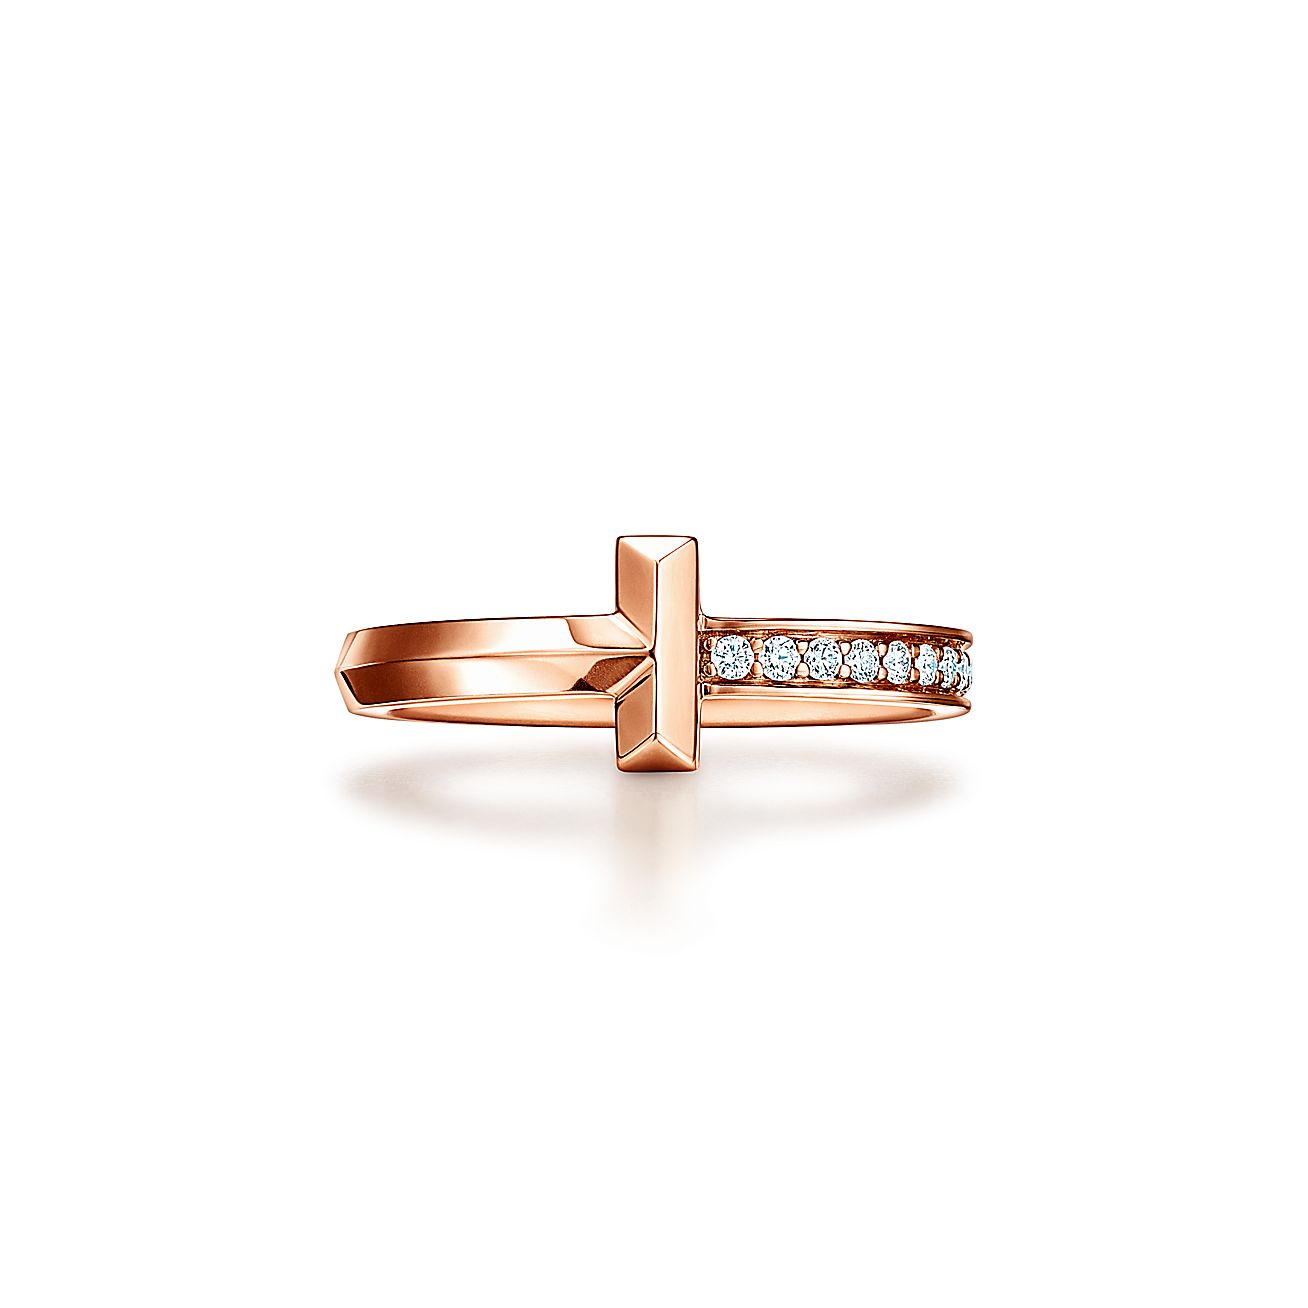 Tiffany T T1 Ring in Rose Gold with Diamonds, 2.5 mm | Tiffany u0026 Co.